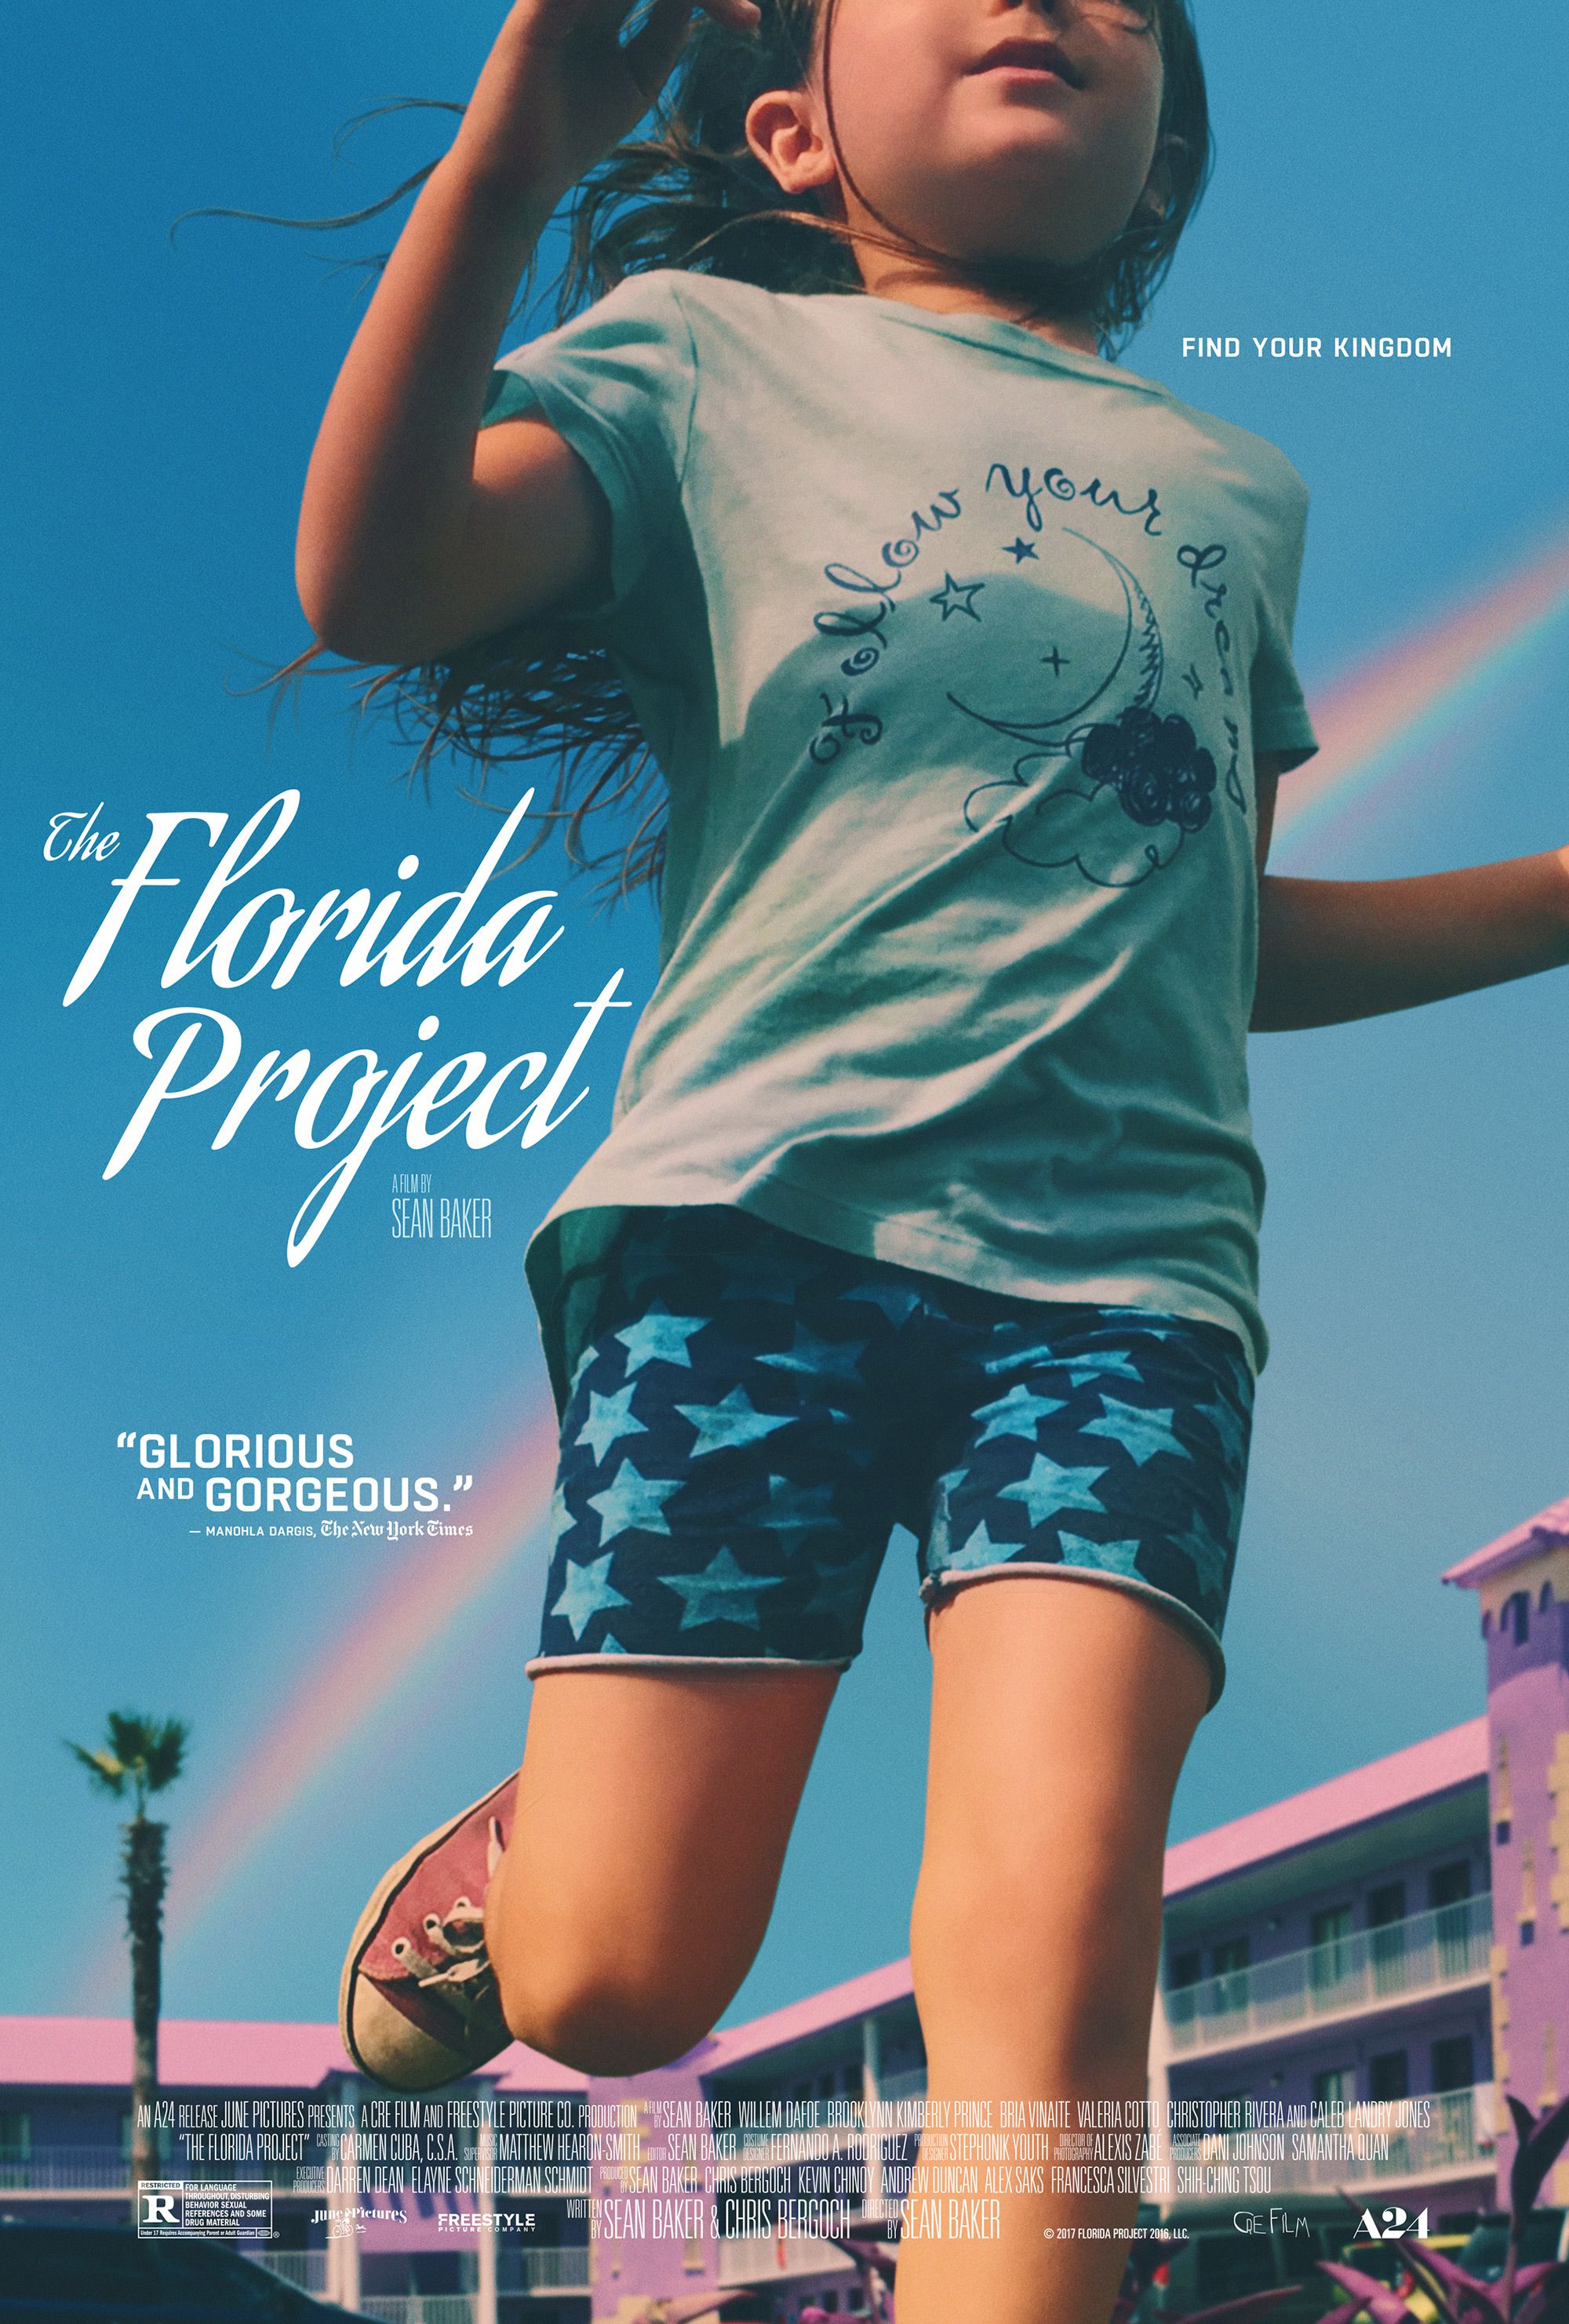 thefloridaproject poster Willem Dafoe races for the Oscar in first trailer for The Florida Project: Watch